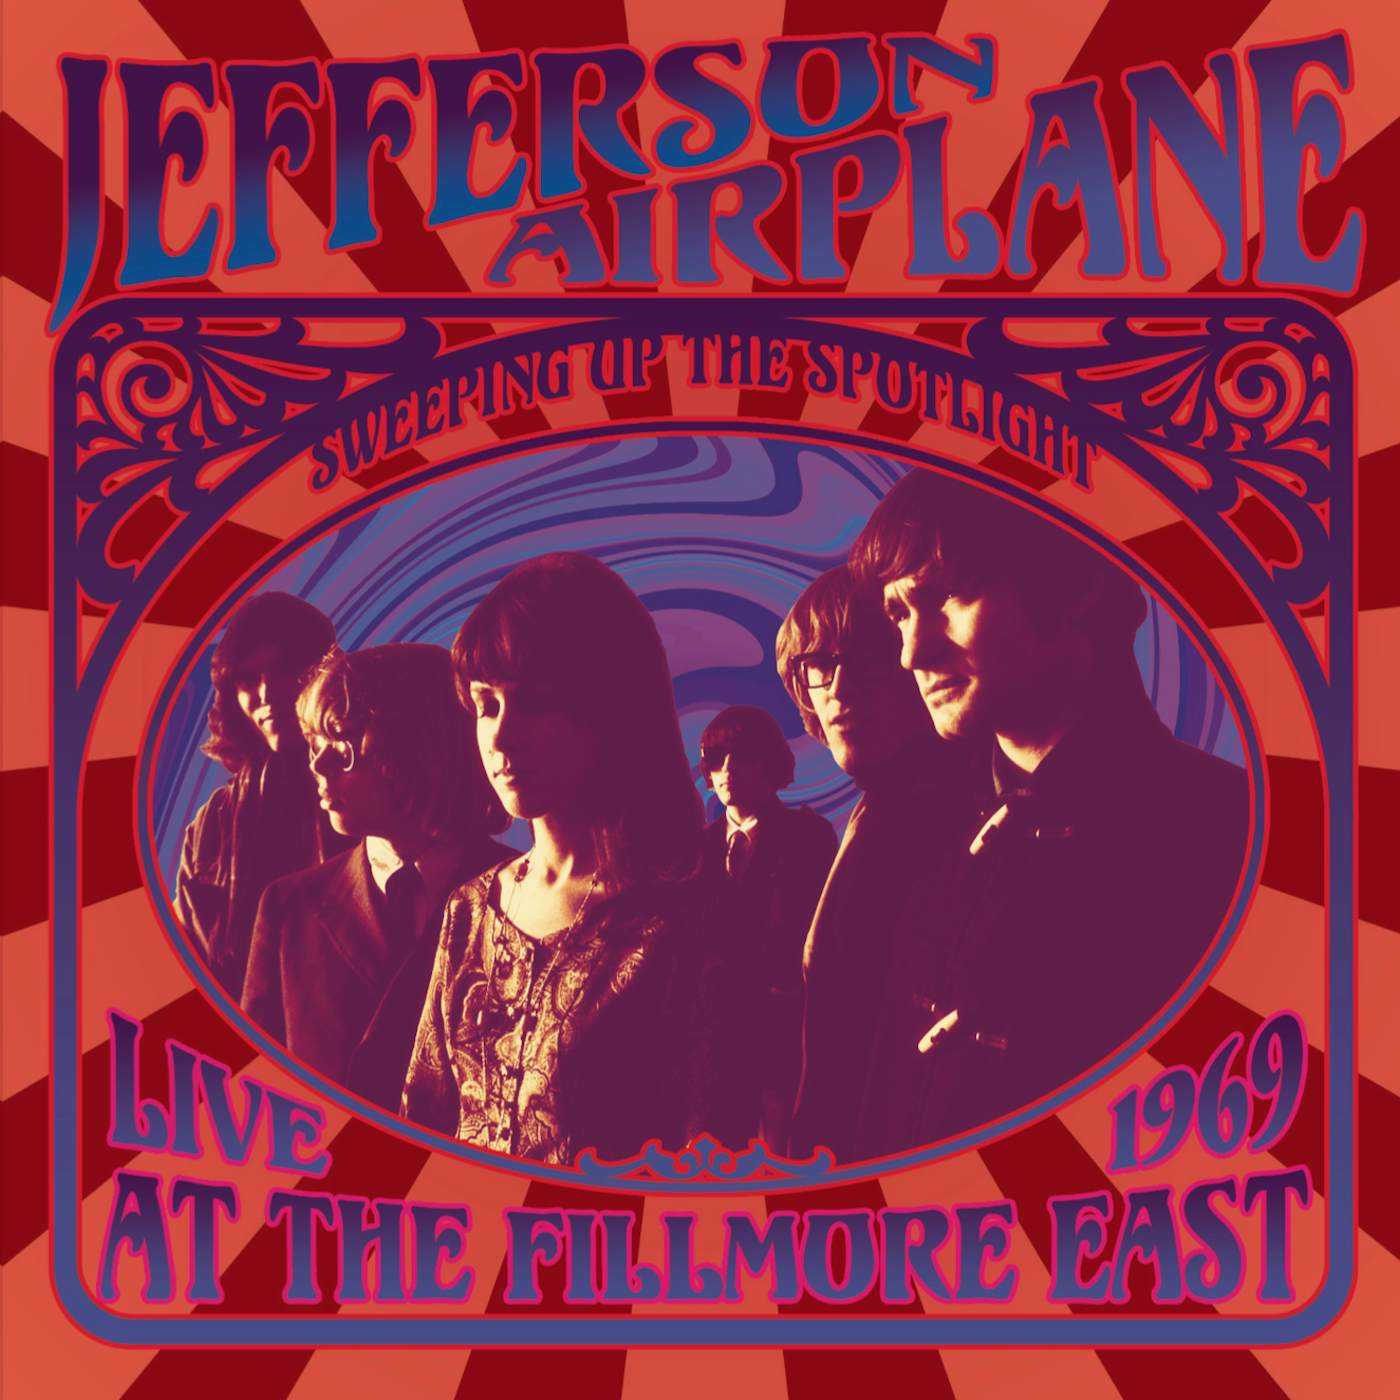 Jefferson Airplane SWEEPING UP THE SPOTLIGHT LIVE AT FILLMORE EAST 69 CD